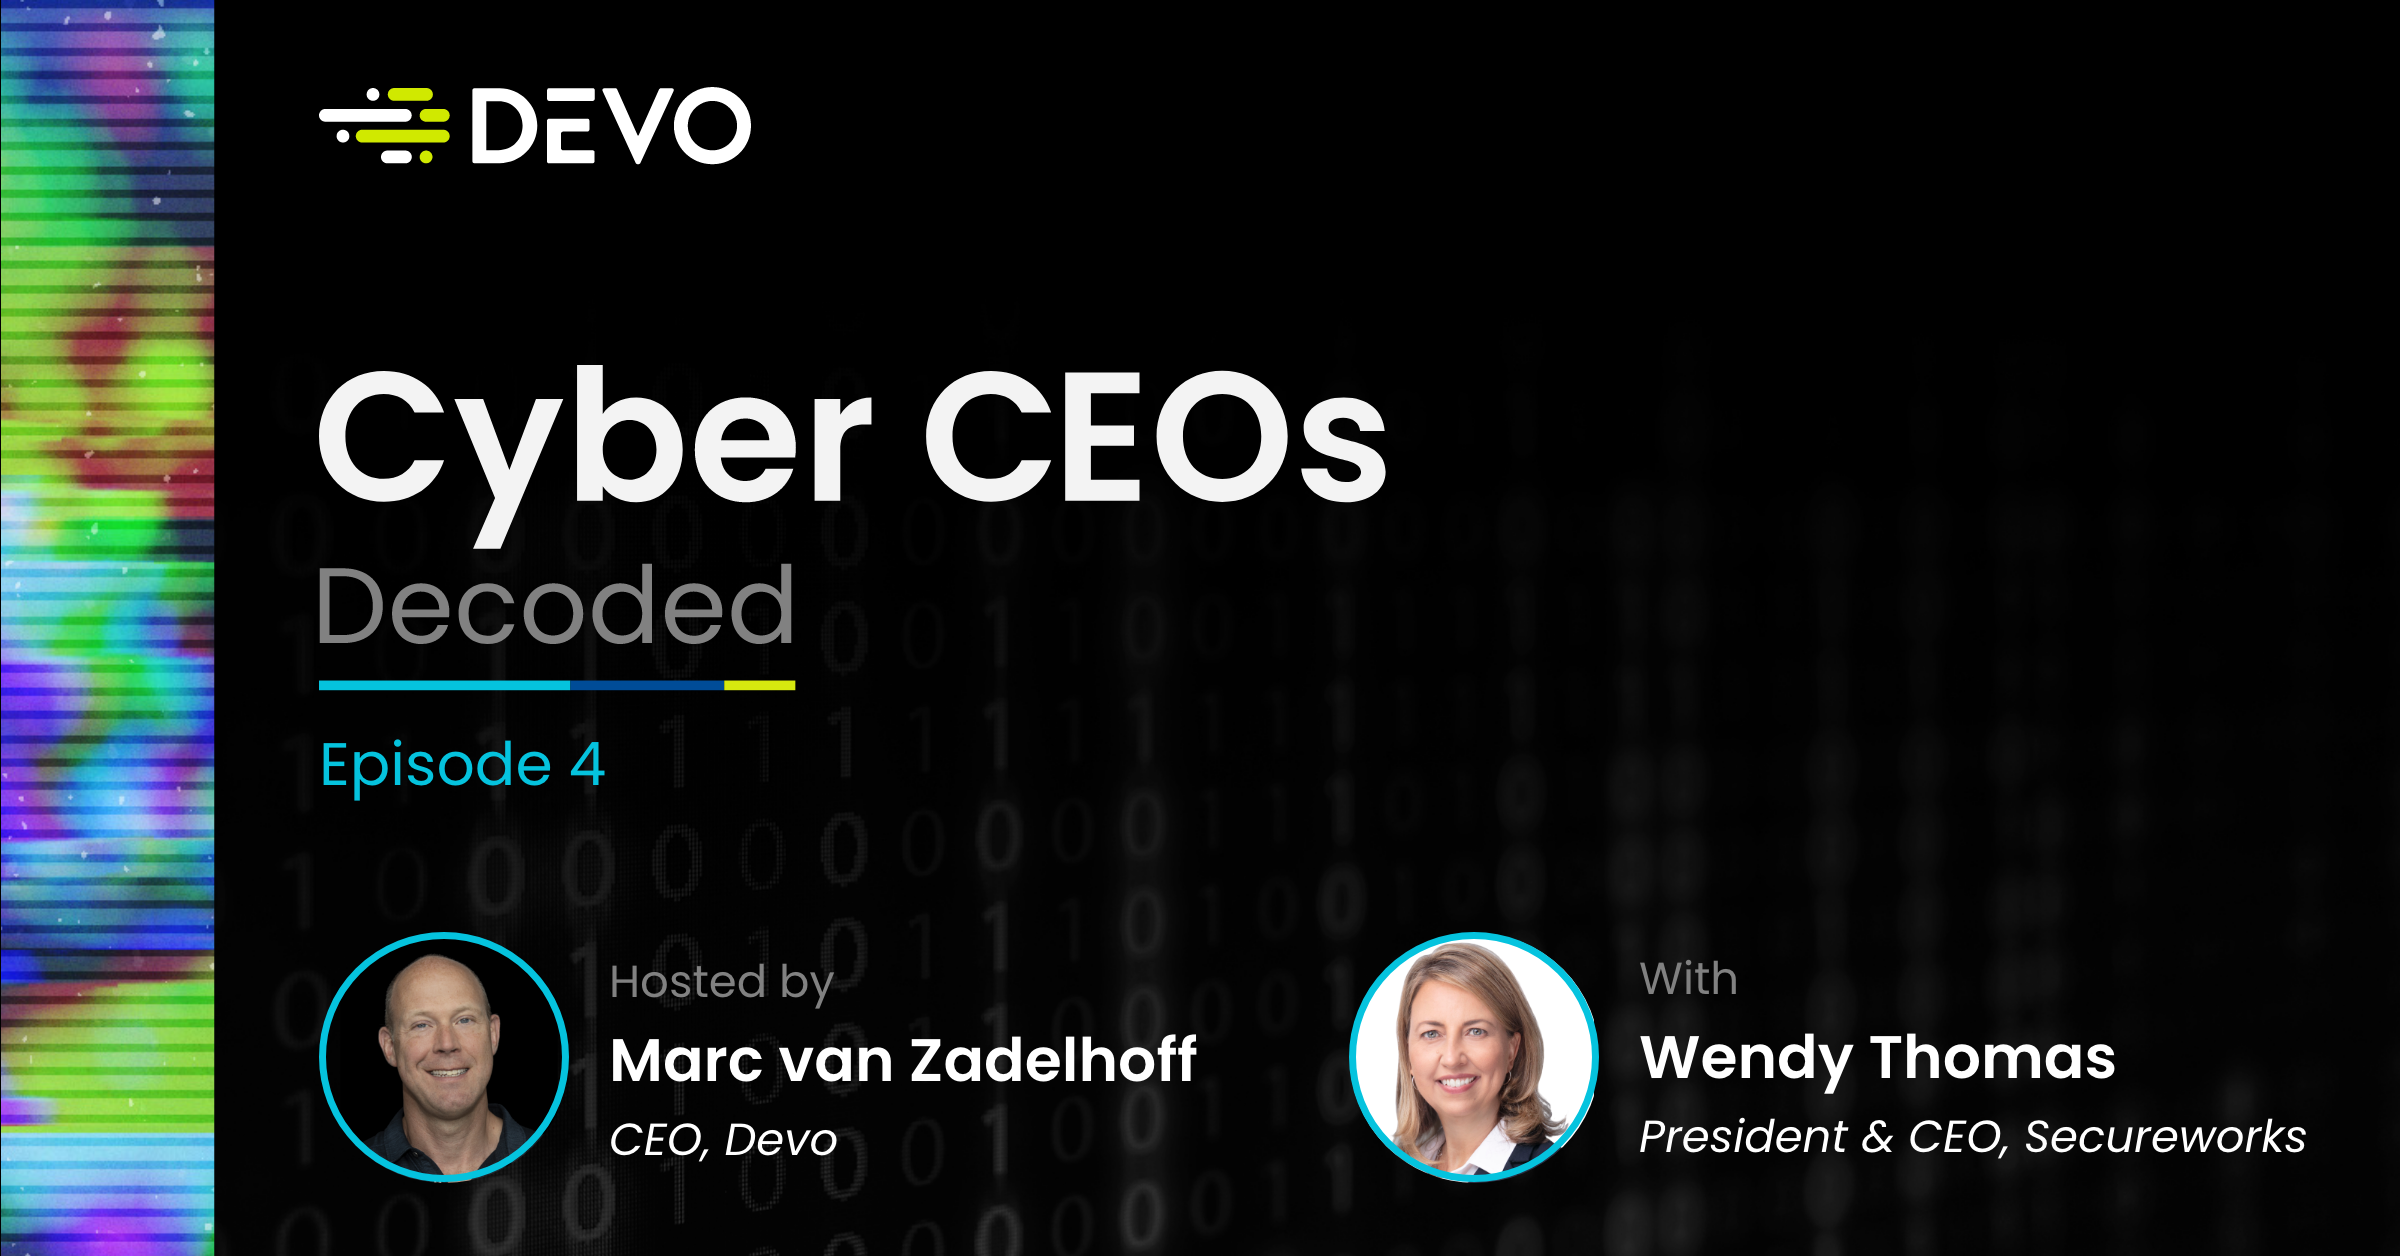 Cyber CEOs Decoded Episode 4 - Wendy Thomas